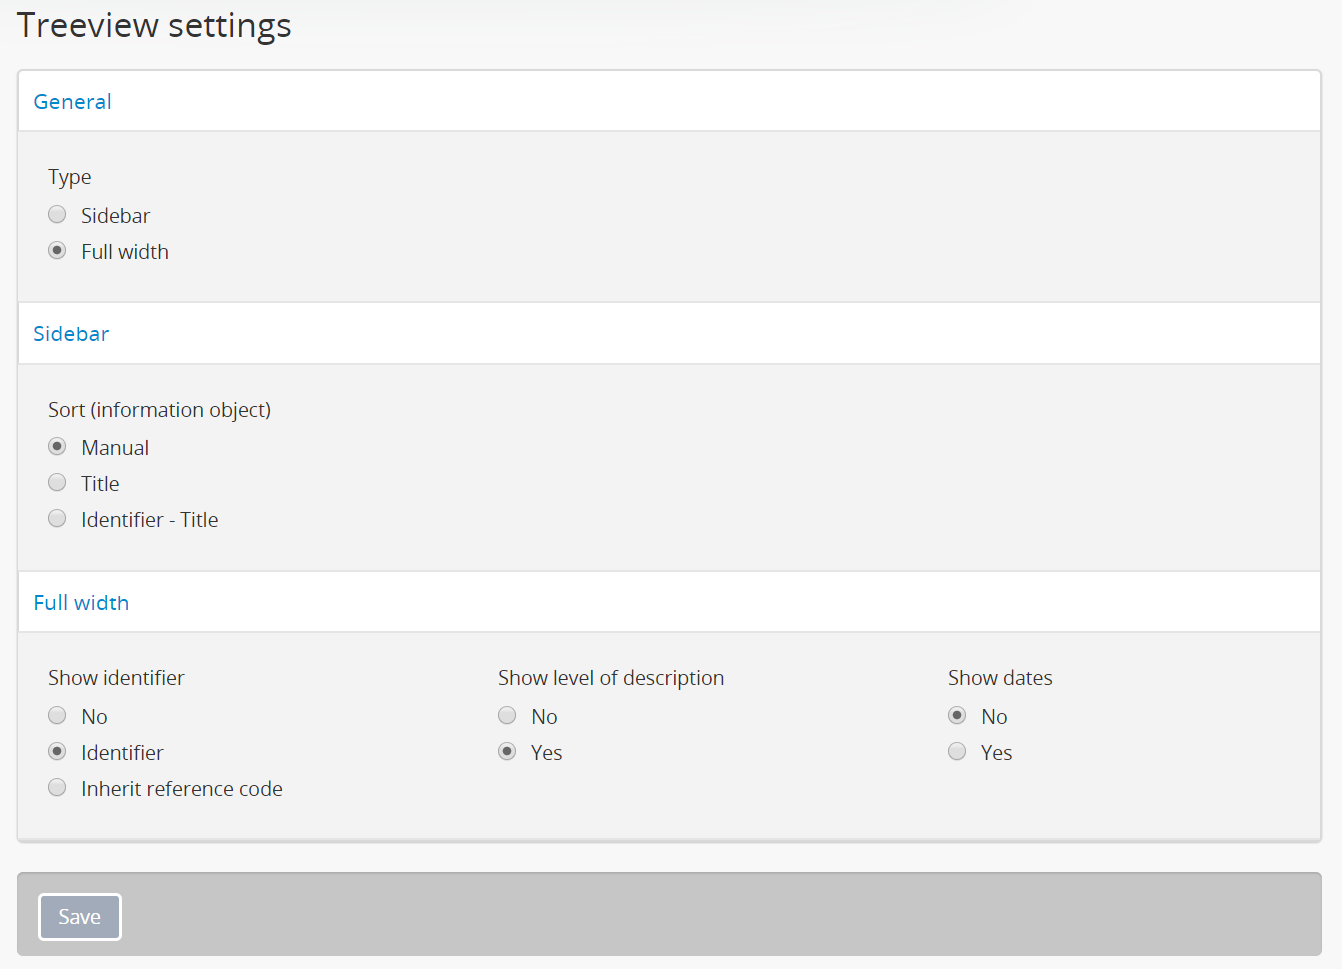 Treview settings page in AtoM